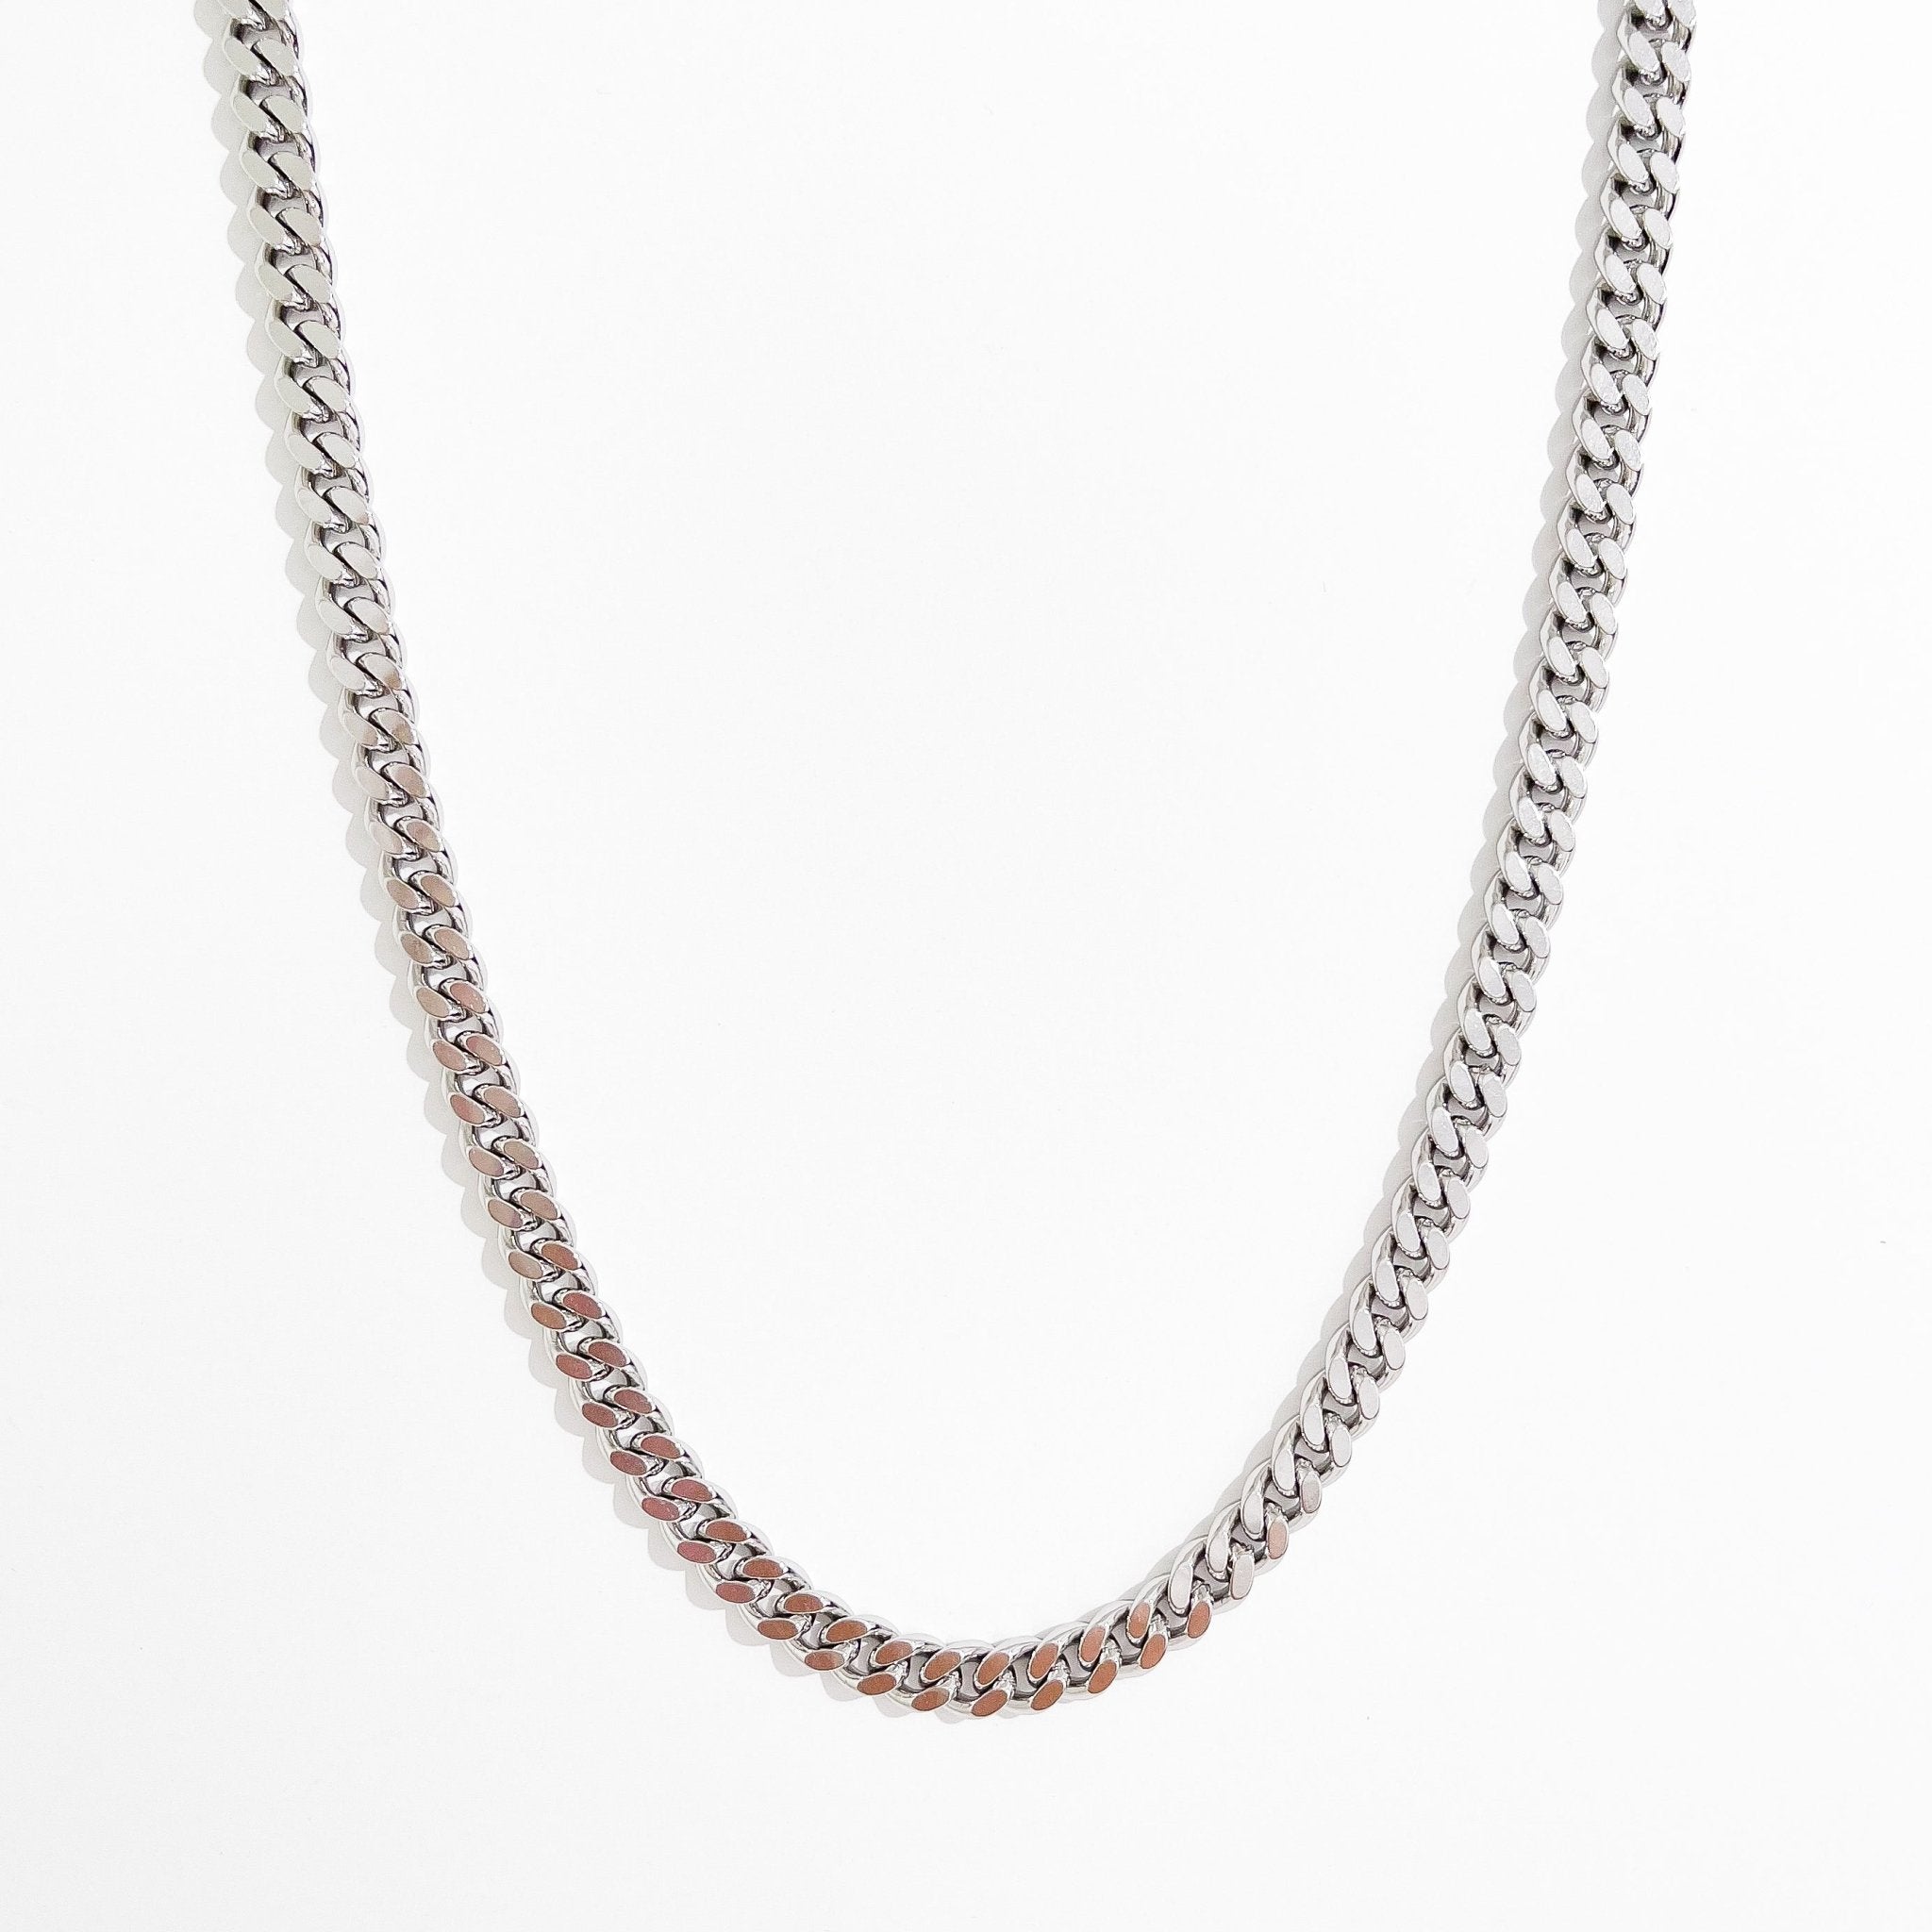 Sasha Necklace 2.0 in Silver - Flaire & Co.